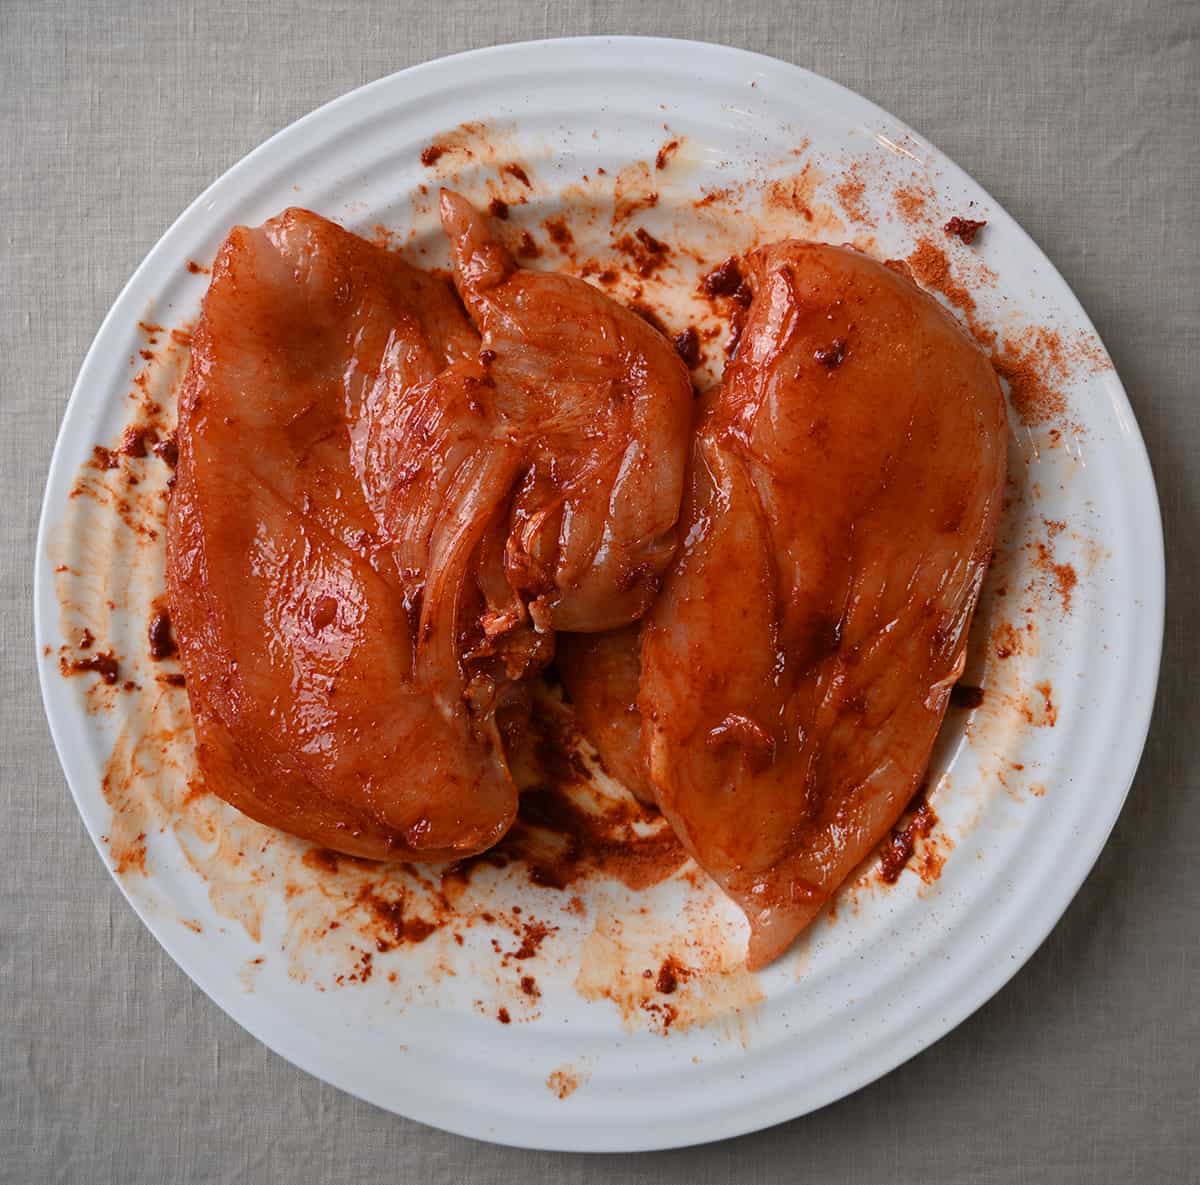 Image of two raw chicken breasts with sriracha seasoning rubber on them, sitting on a plate.